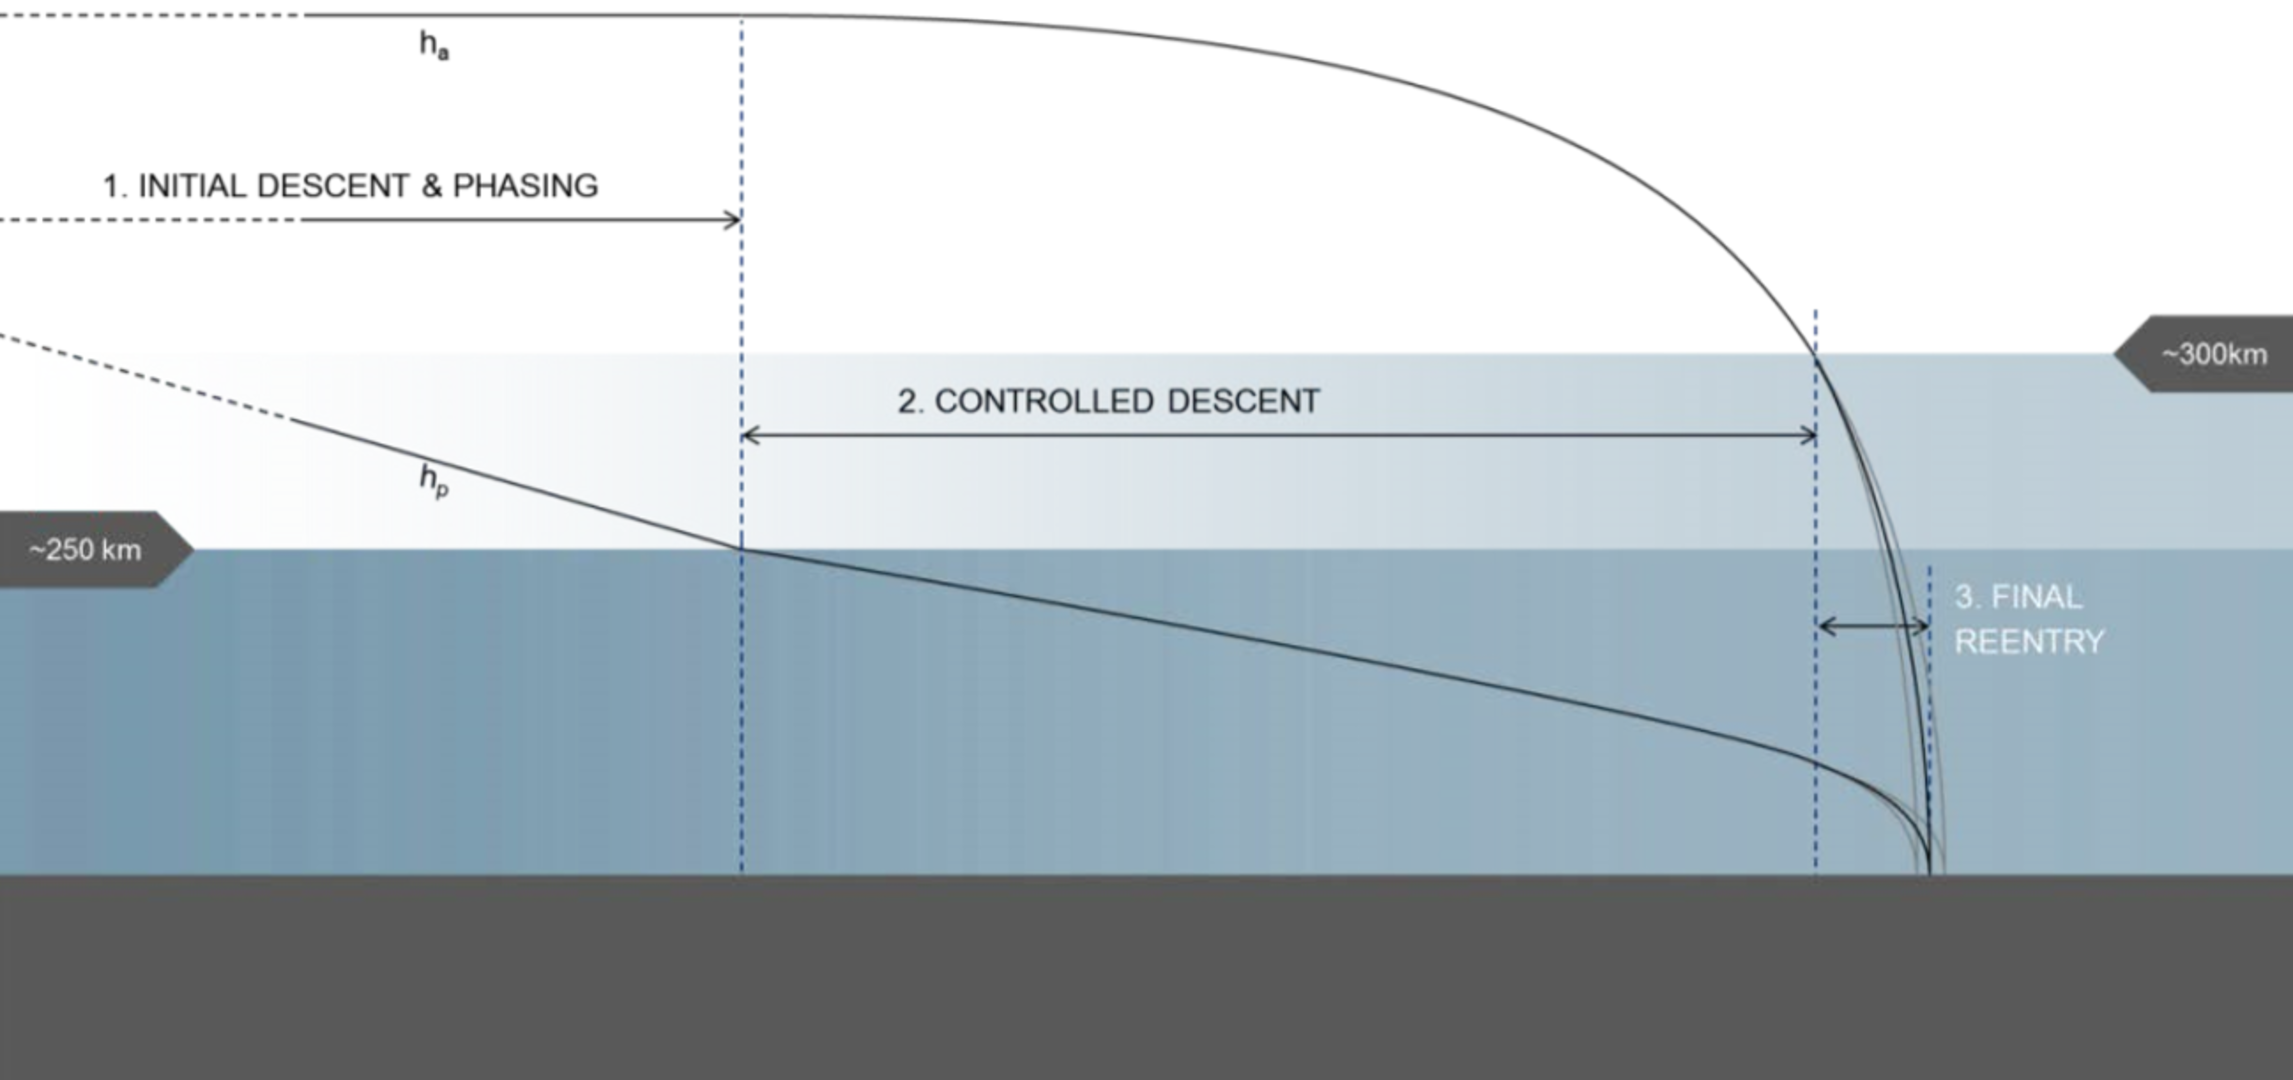 The three phases of a semi-controlled descent